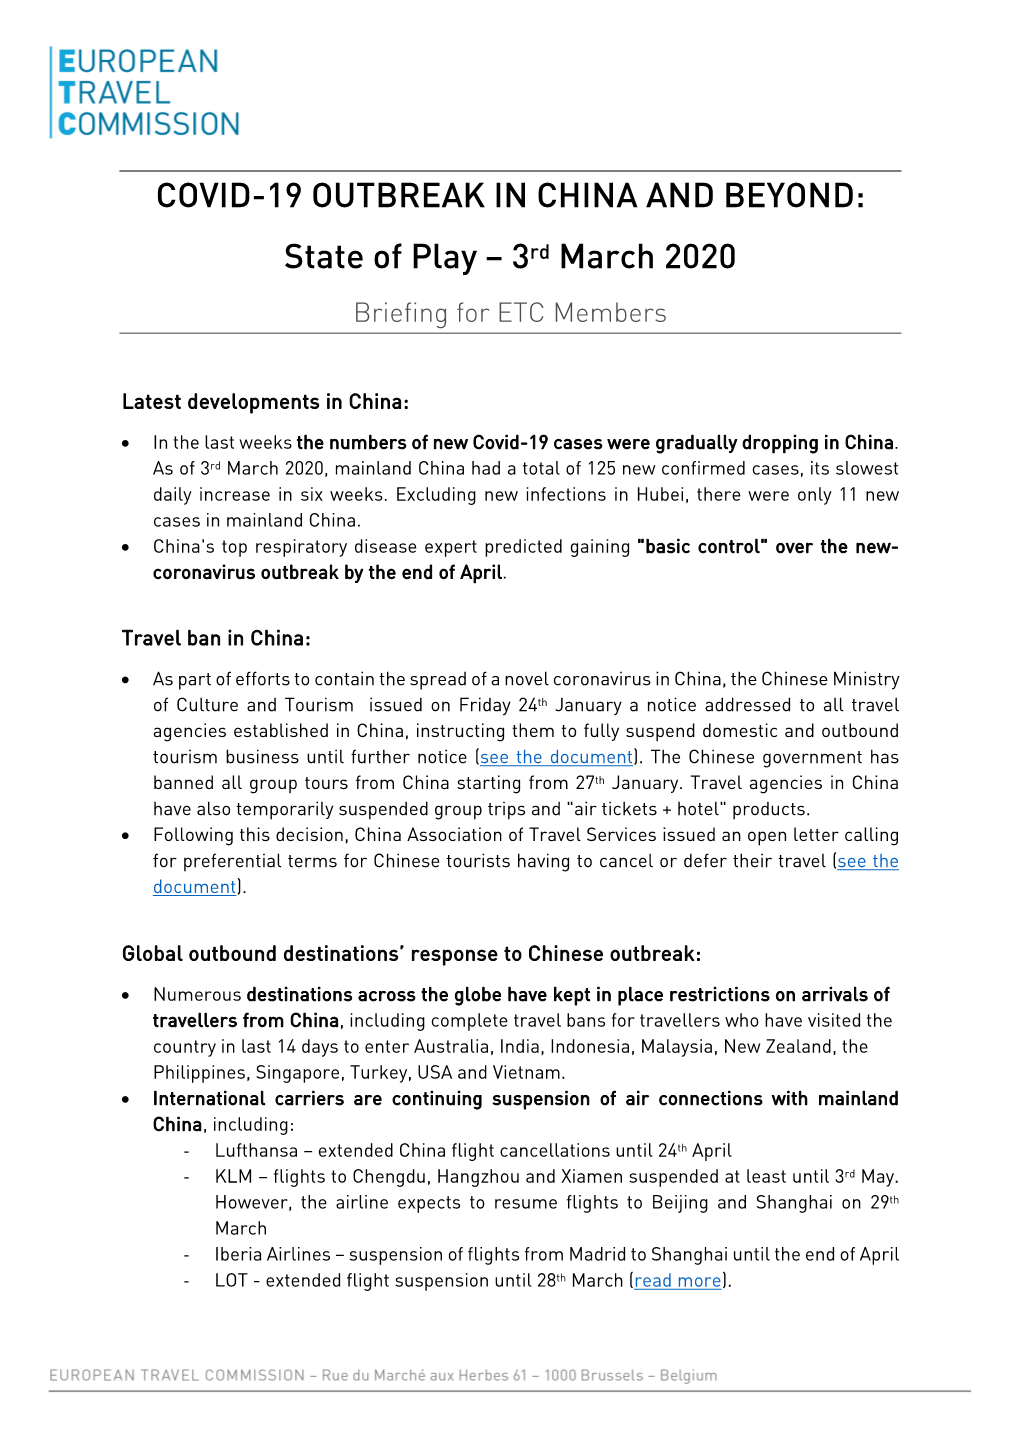 COVID-19 OUTBREAK in CHINA and BEYOND: State of Play – 3Rd March 2020 Briefing for ETC Members